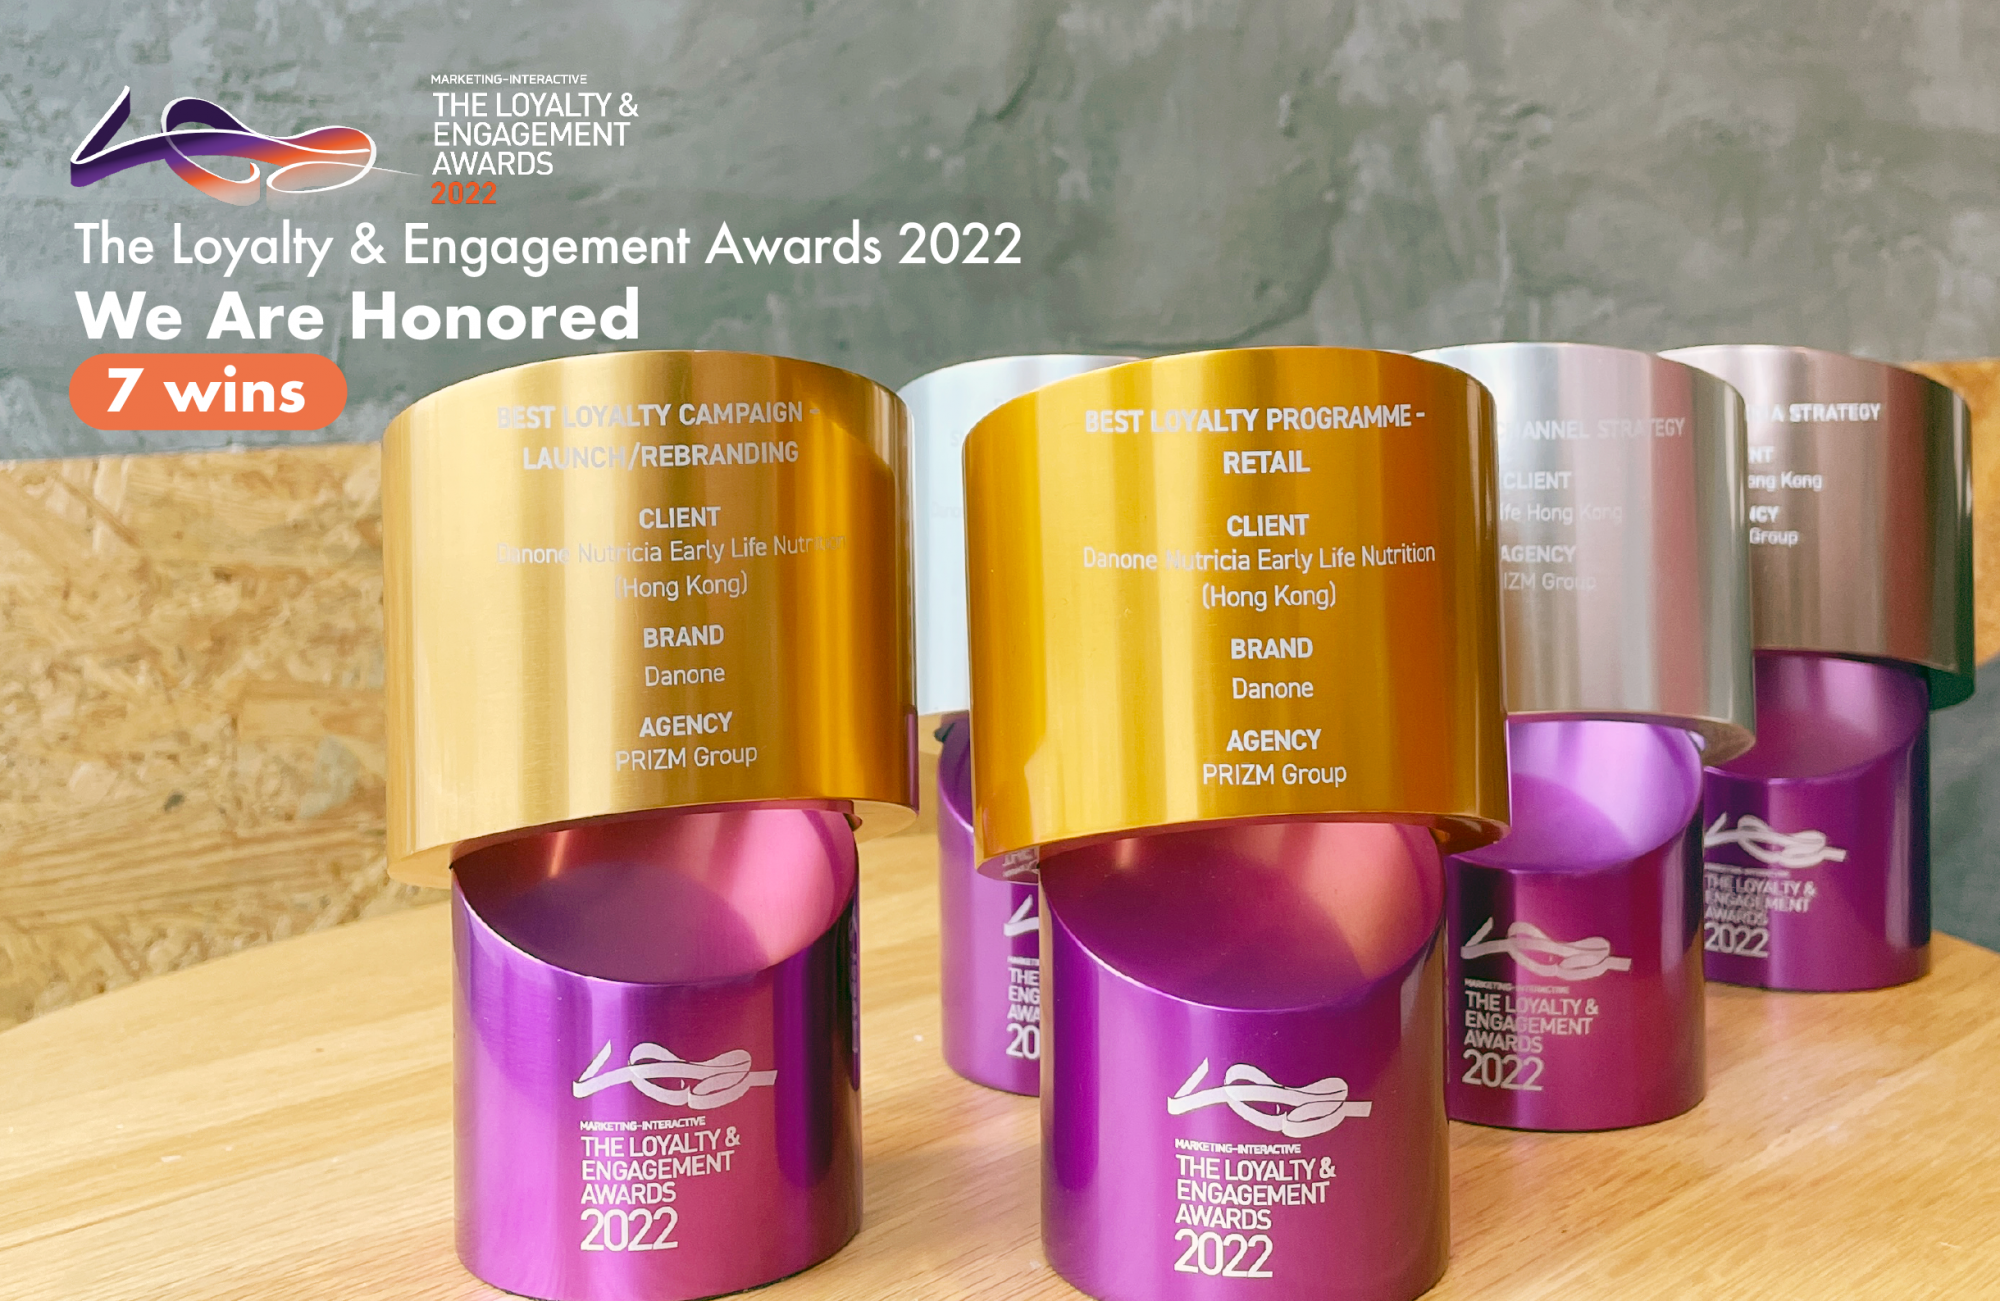 The Loyalty & Engagement Awards 2022